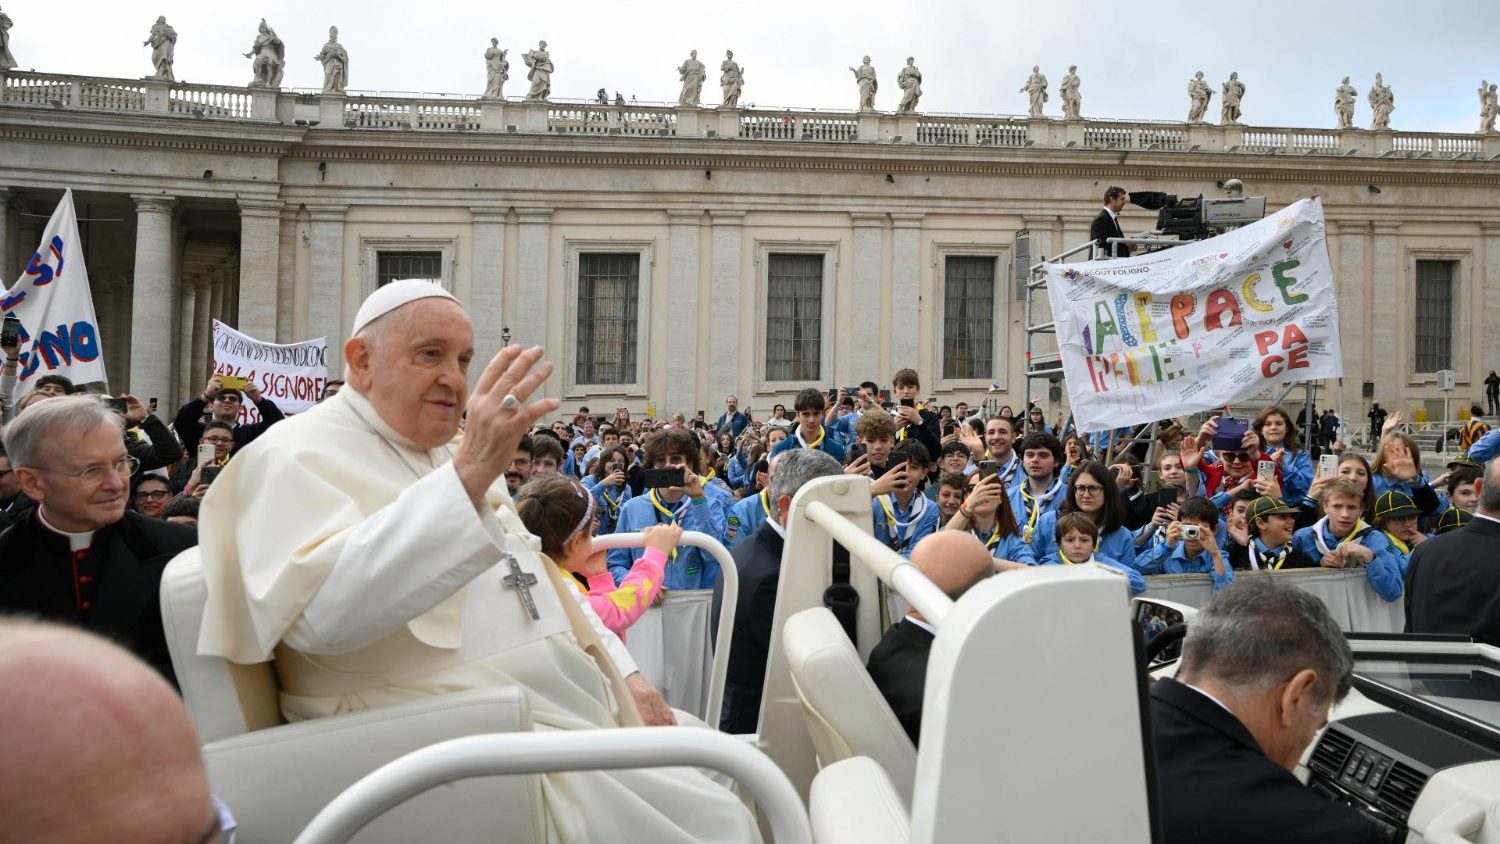 The Pope: The Gospel is not an ideology, but rather a declaration of joy